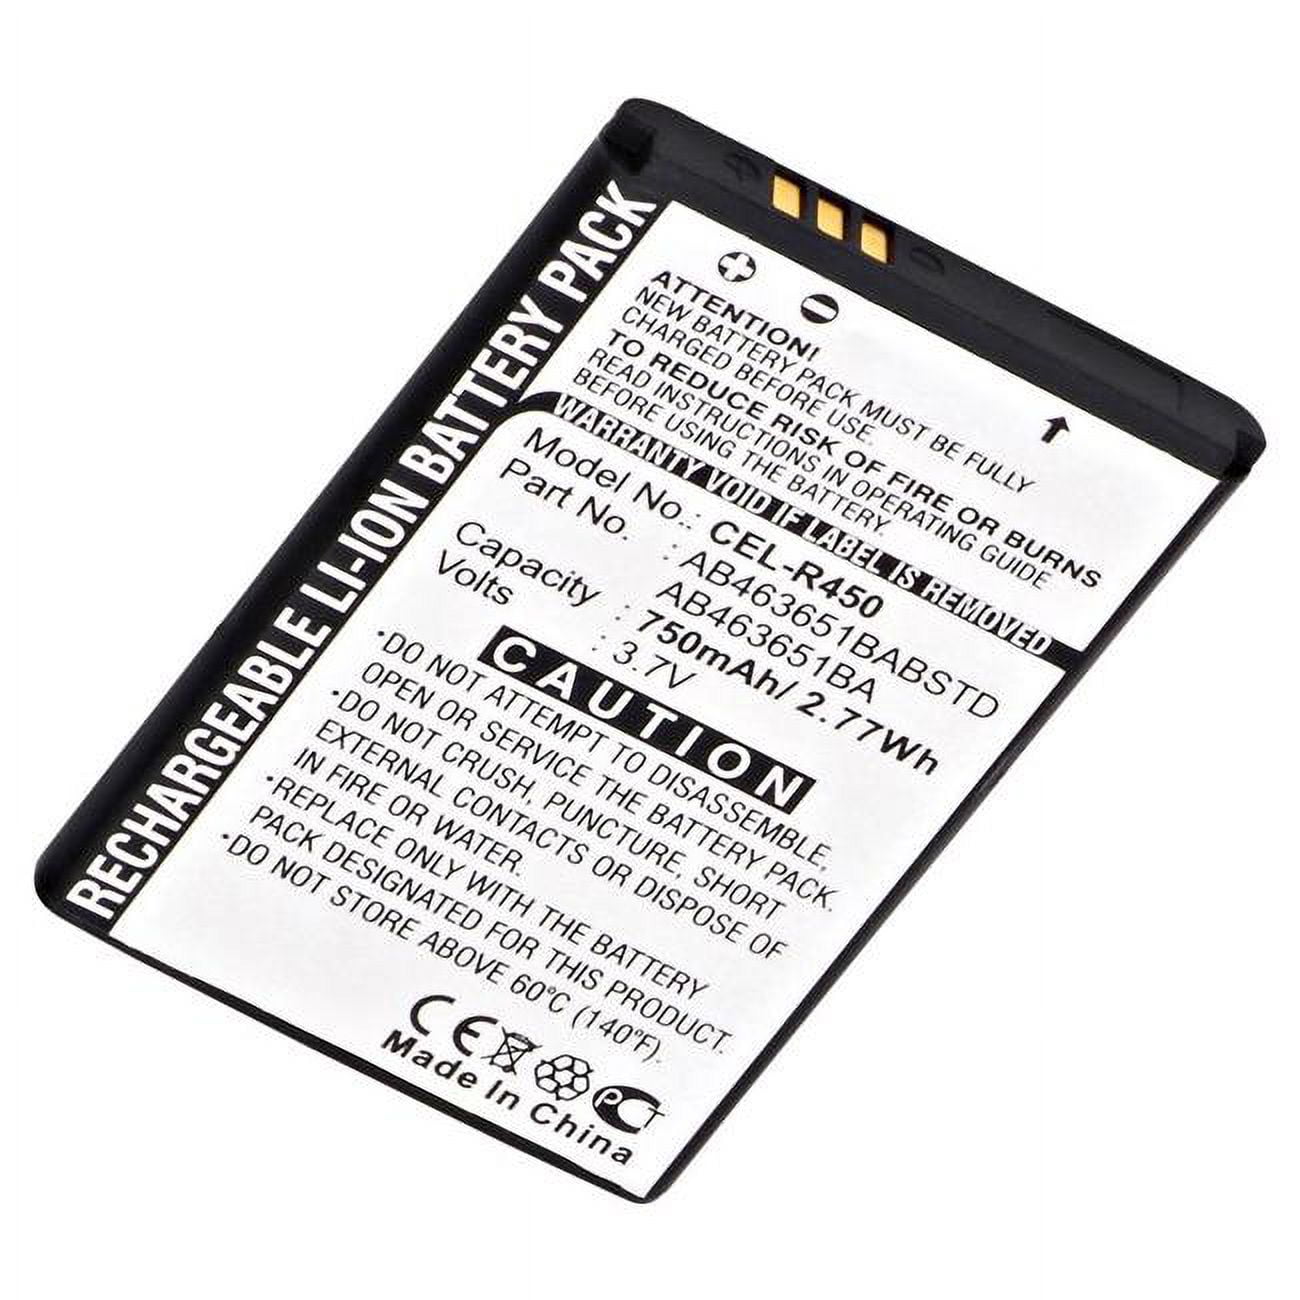 Picture of Ultralast CEL-R450 3.7V & 750 mAh Replacement Lithium-Ion Battery for Samsung Exclaim Cellular Phone